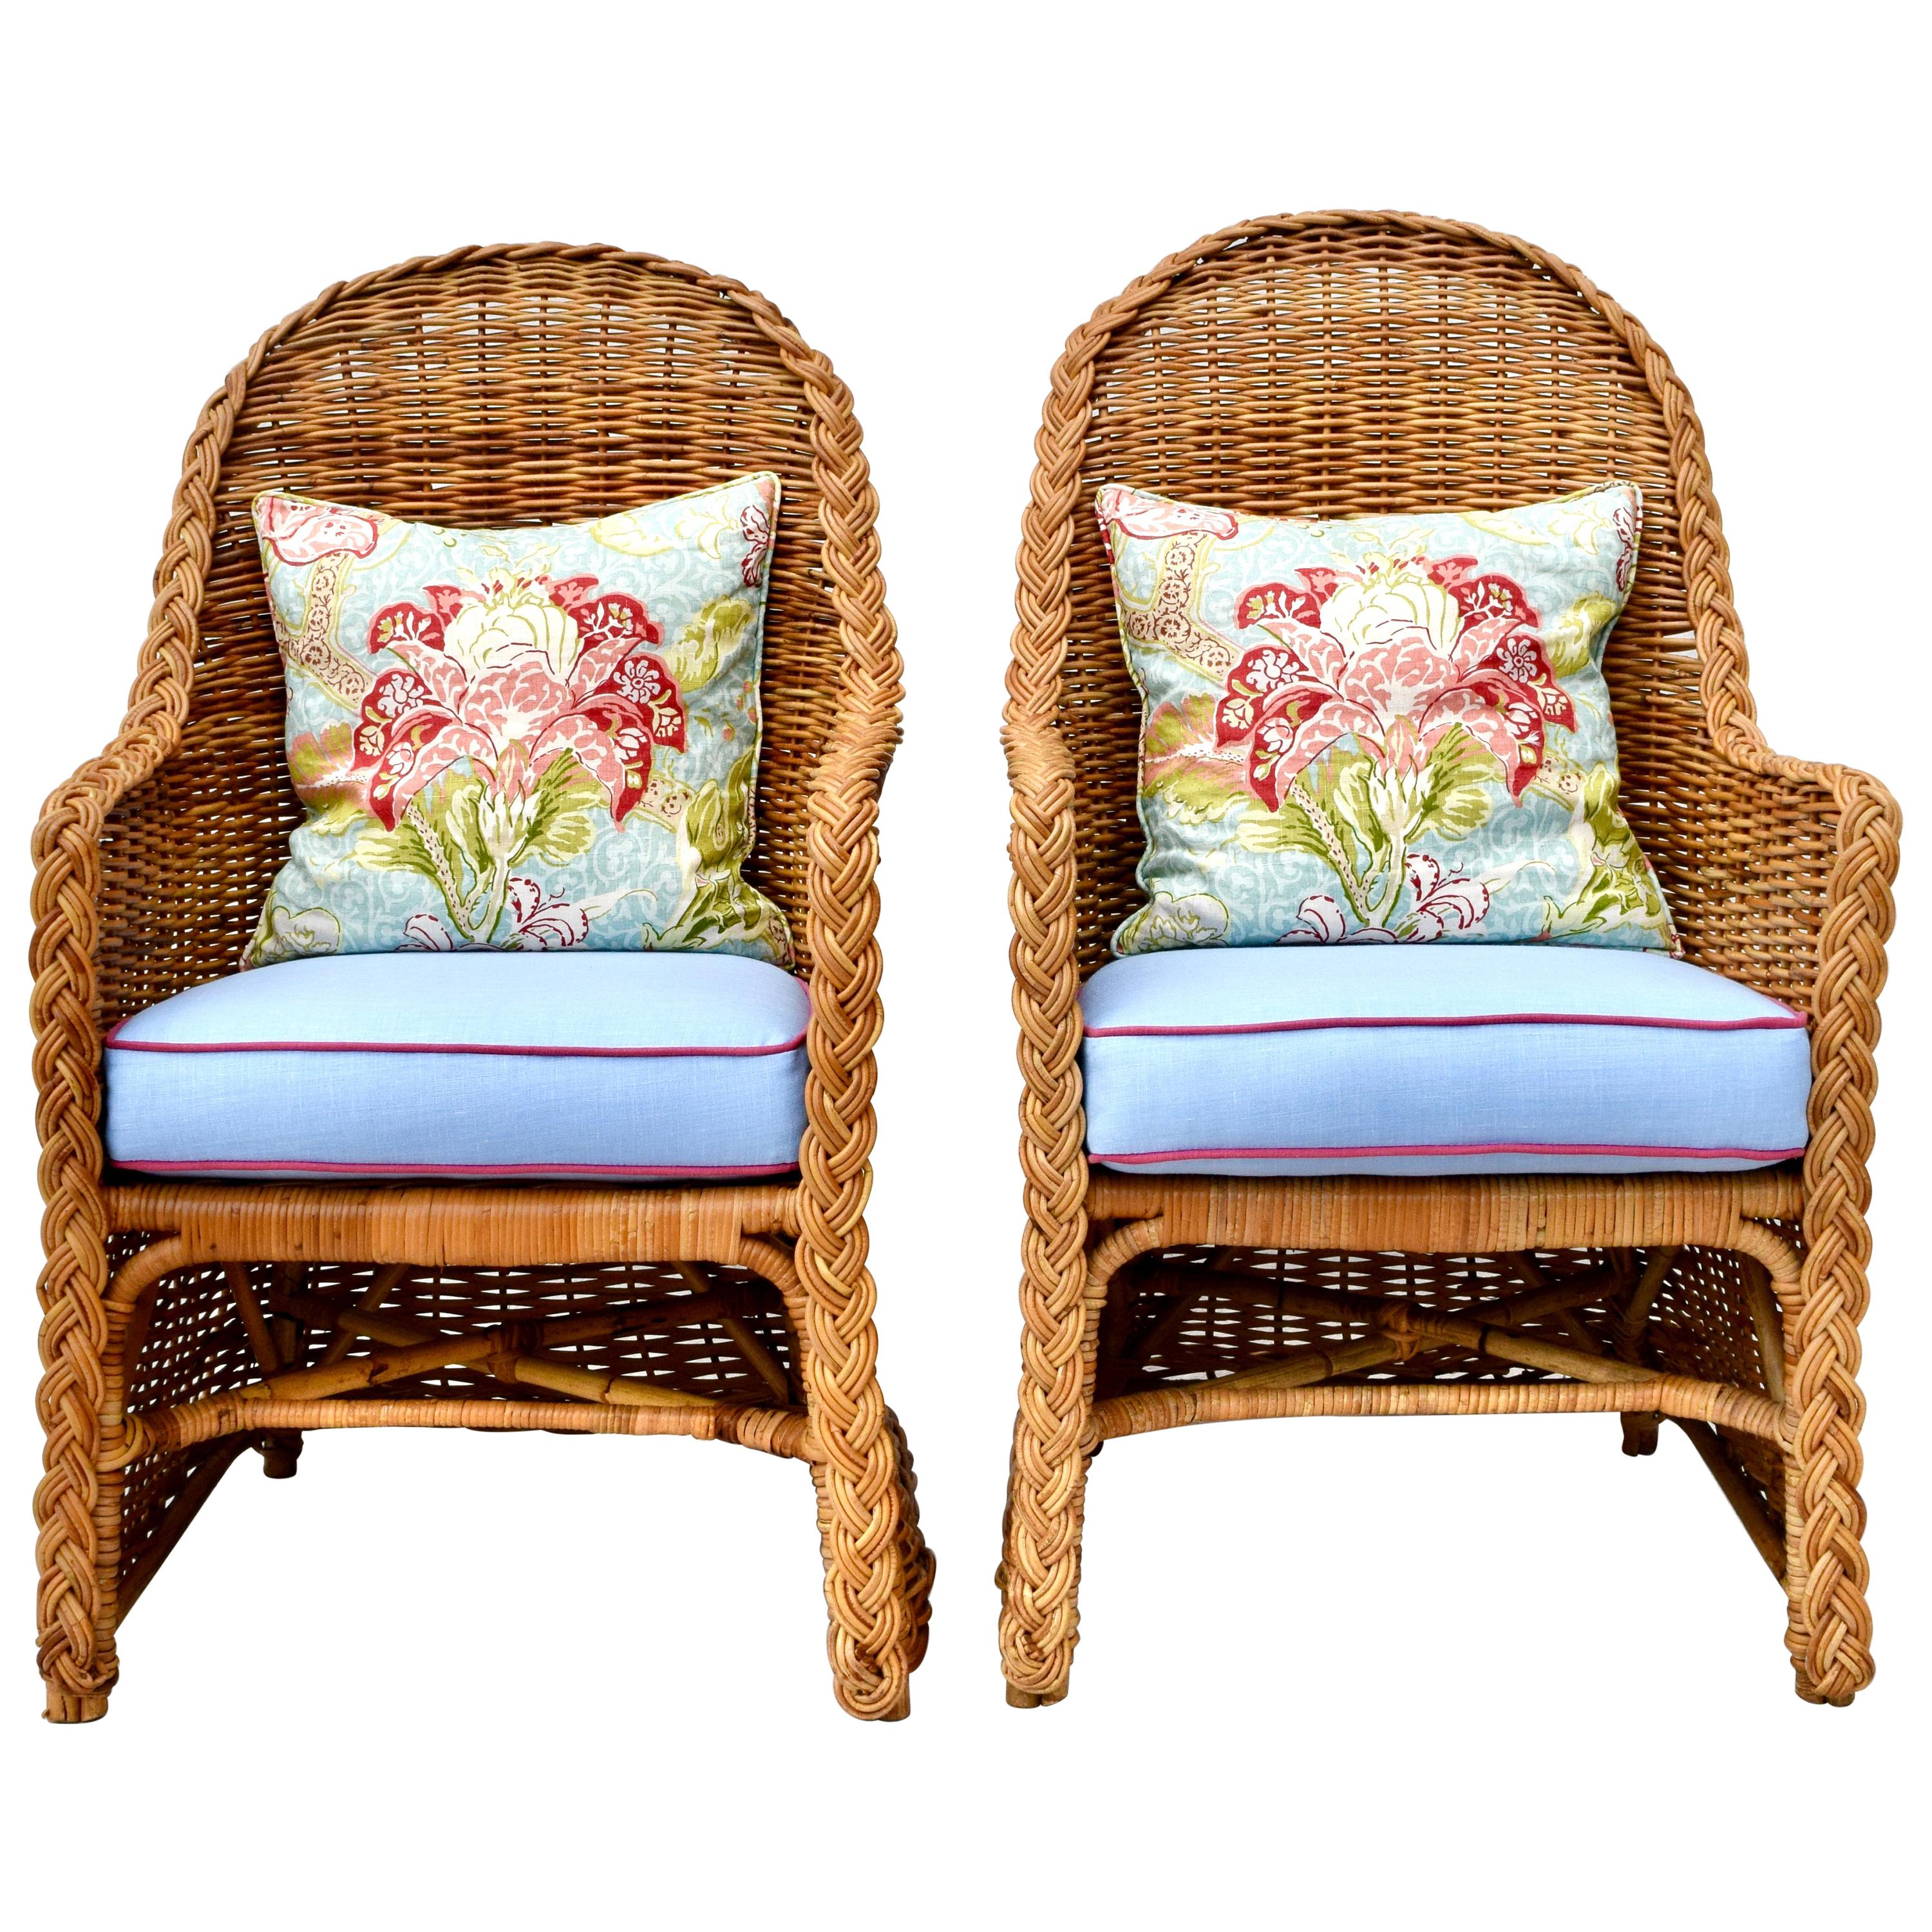 Michael Taylor Wicker Rattan Arm Chairs, Pair